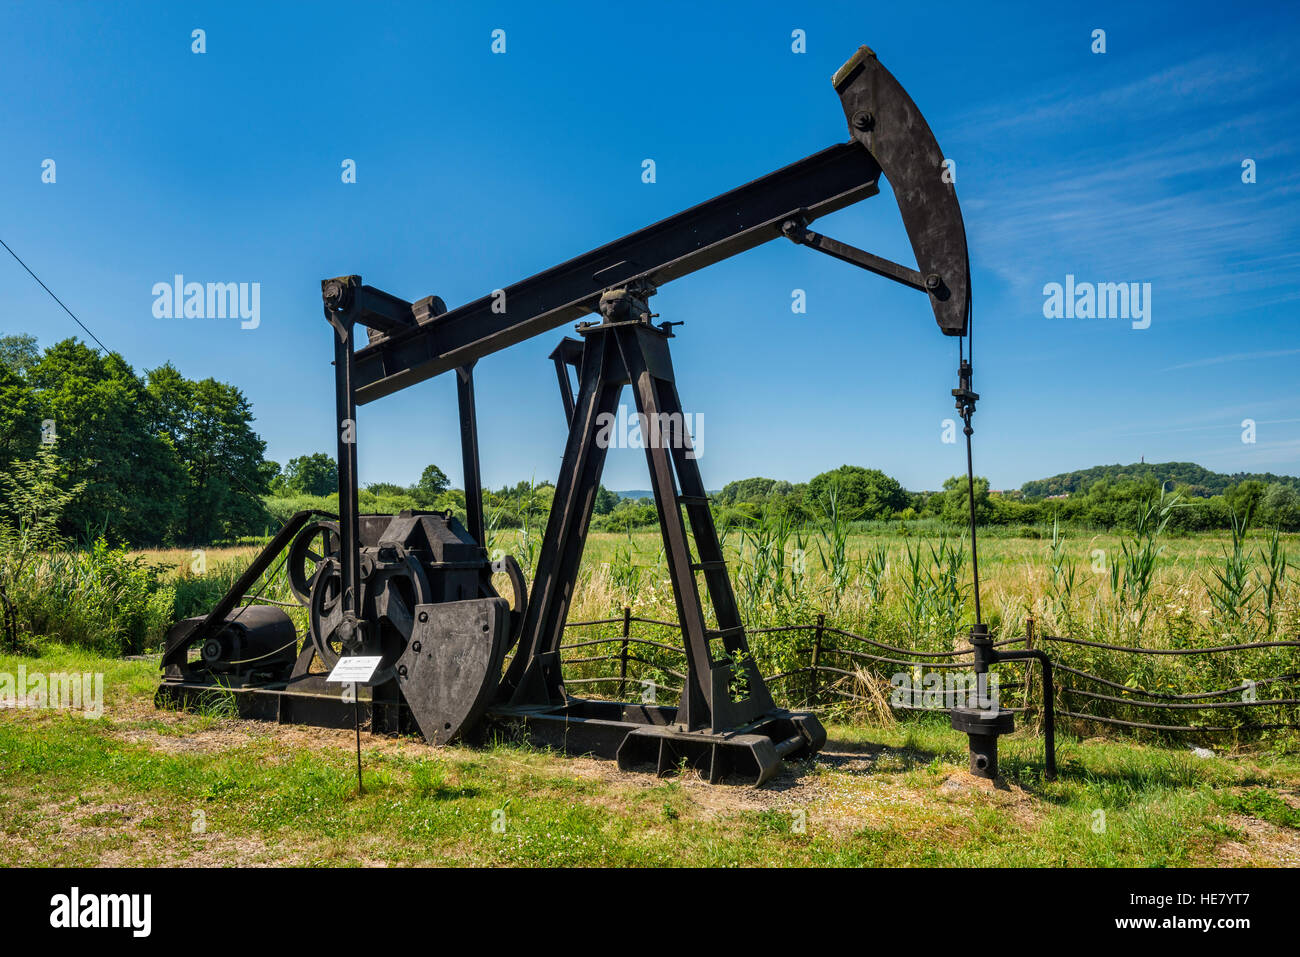 IZP 2000 oil well pump jack, used in Subcarpathian wells, oil industry exhibition at Rural Architecture Museum in Sanok, Poland Stock Photo